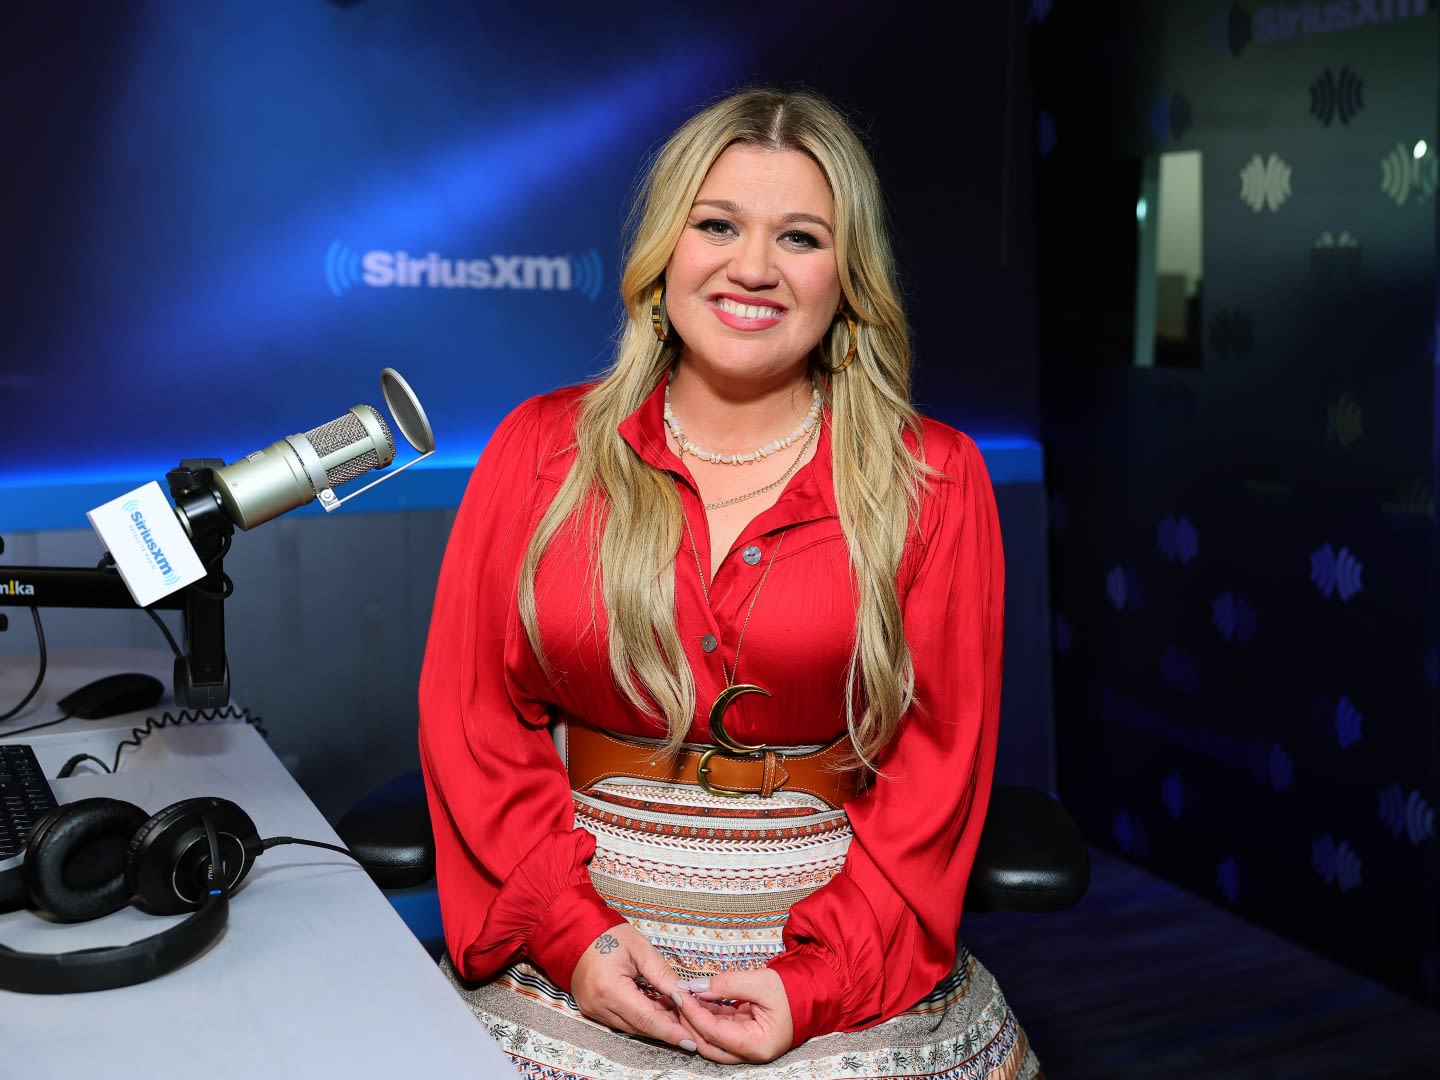 Kelly Clarkson's Refuses To Be 'Bulldozed' in Latest Legal Case With Ex Brandon Blackstock